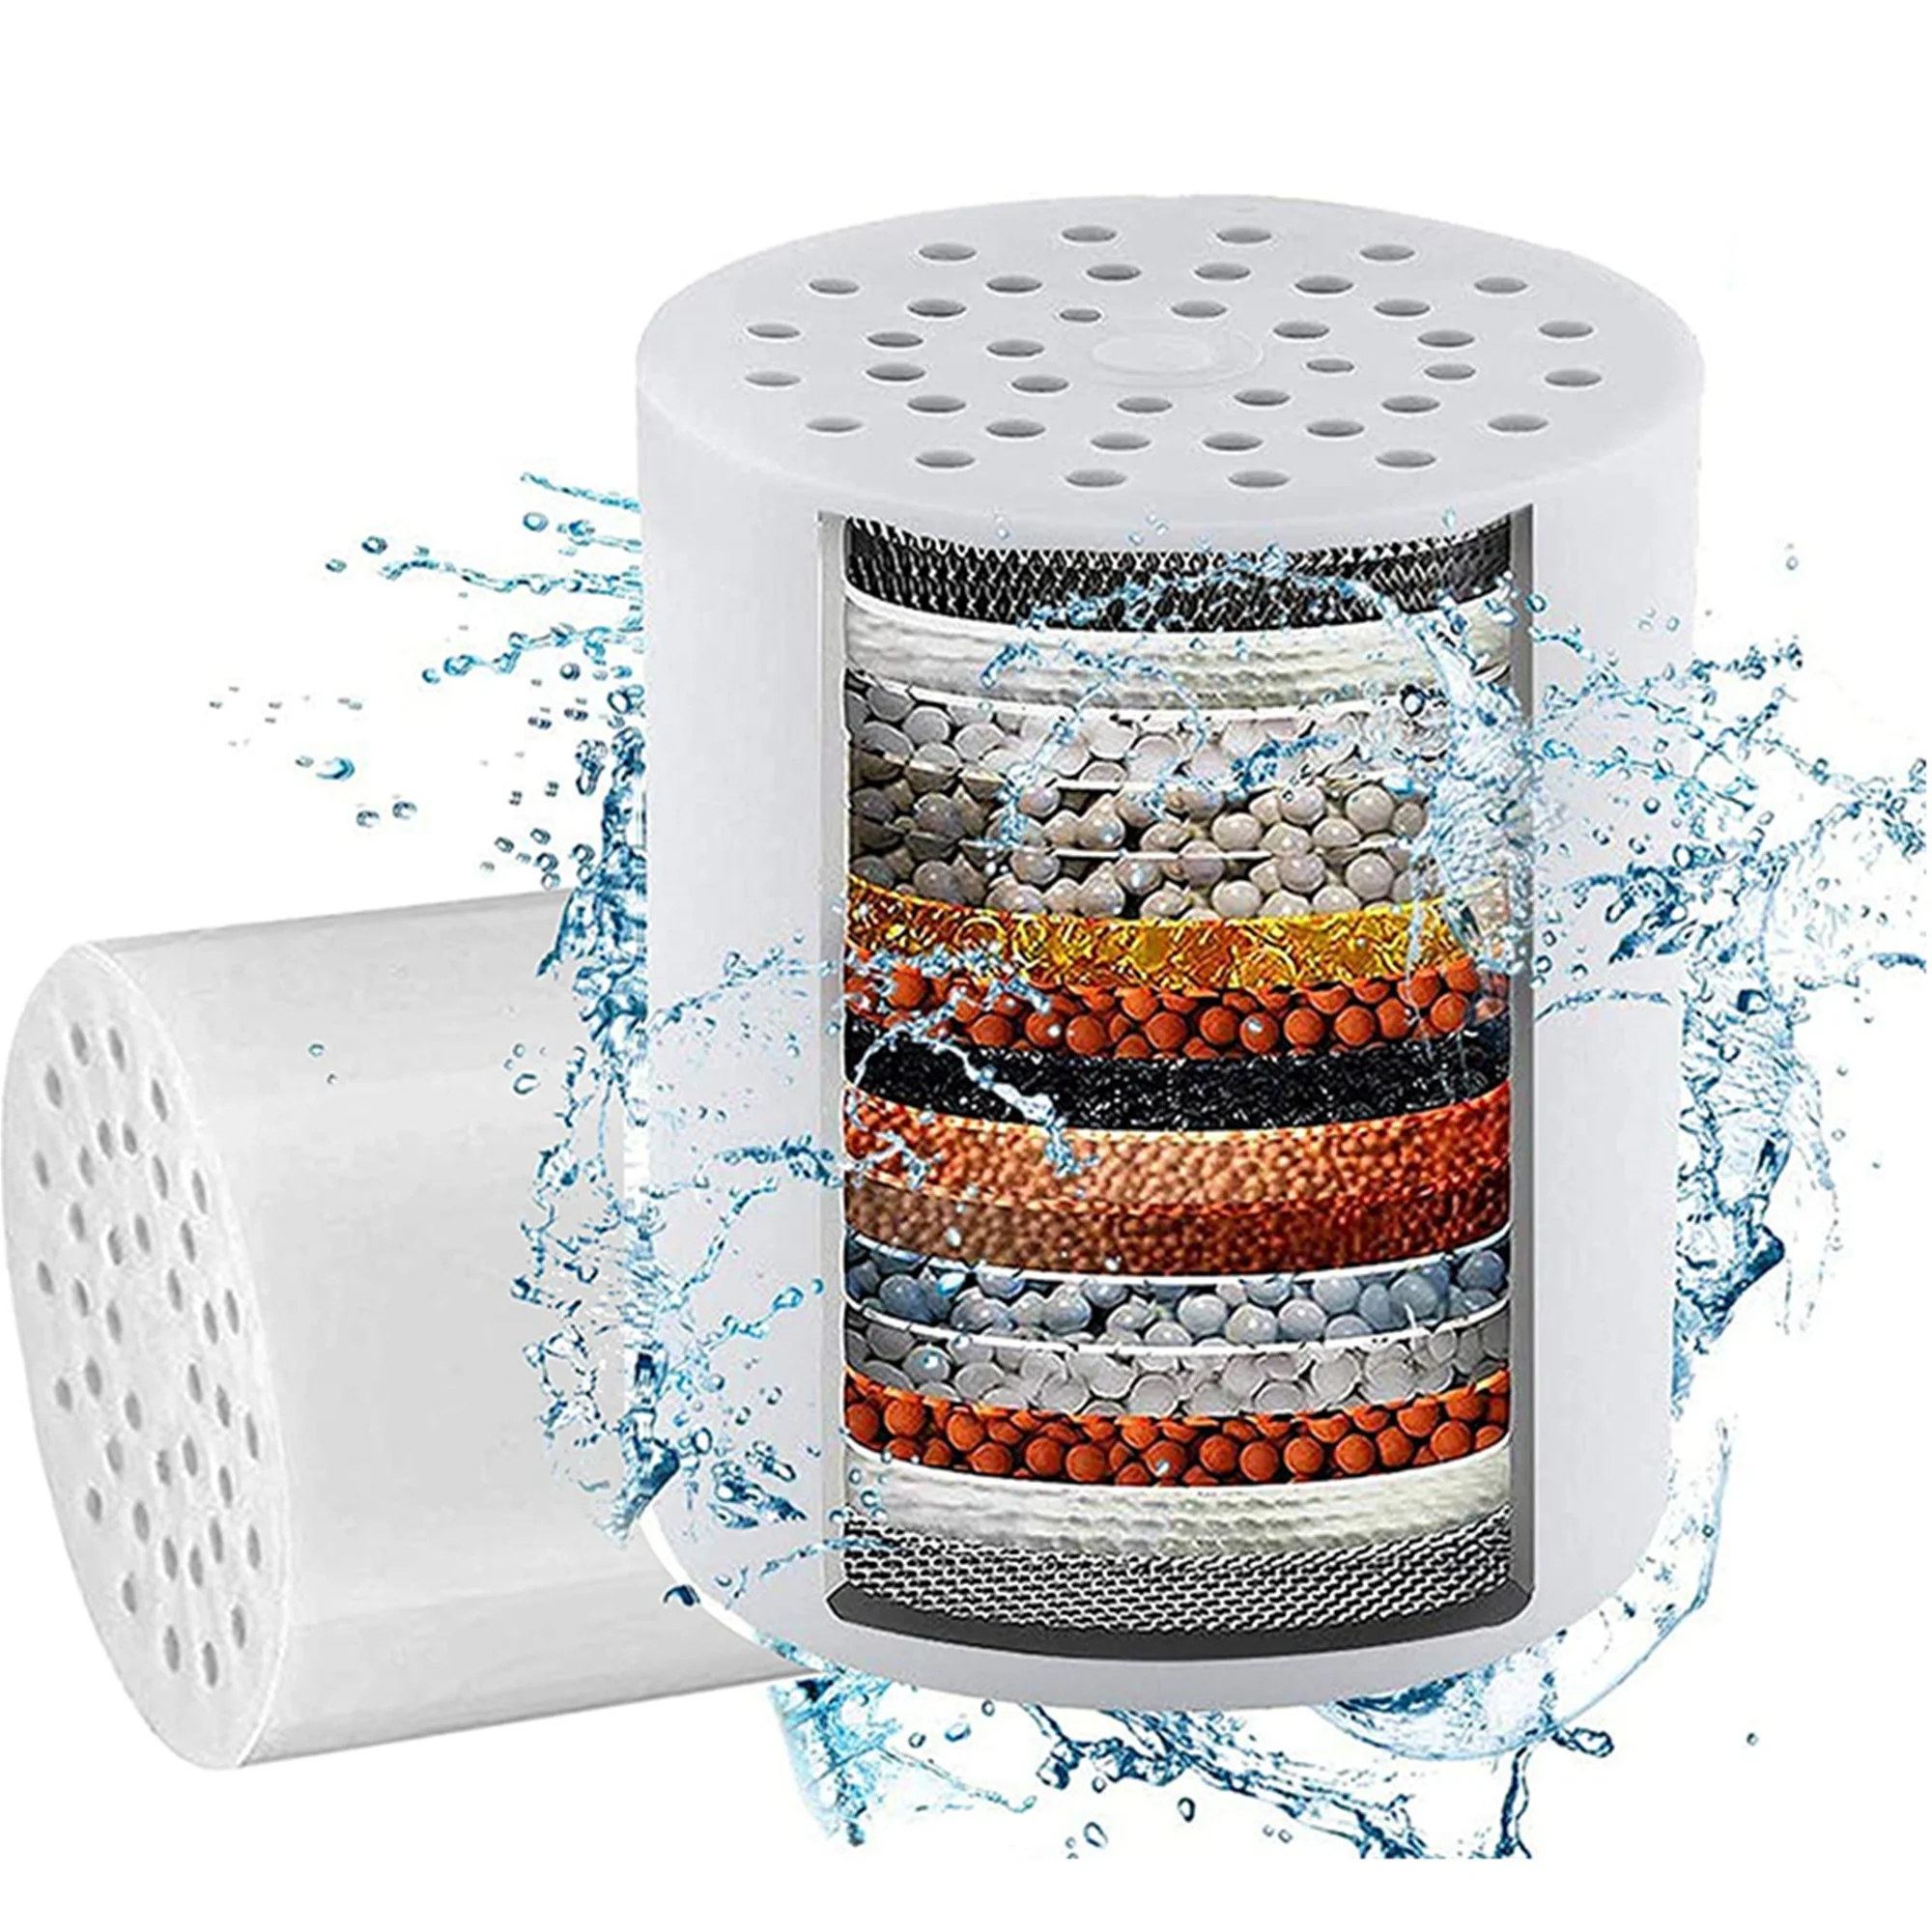 Amazon hot selling multi stages universal replaceable shower water filter cartridges.jpg